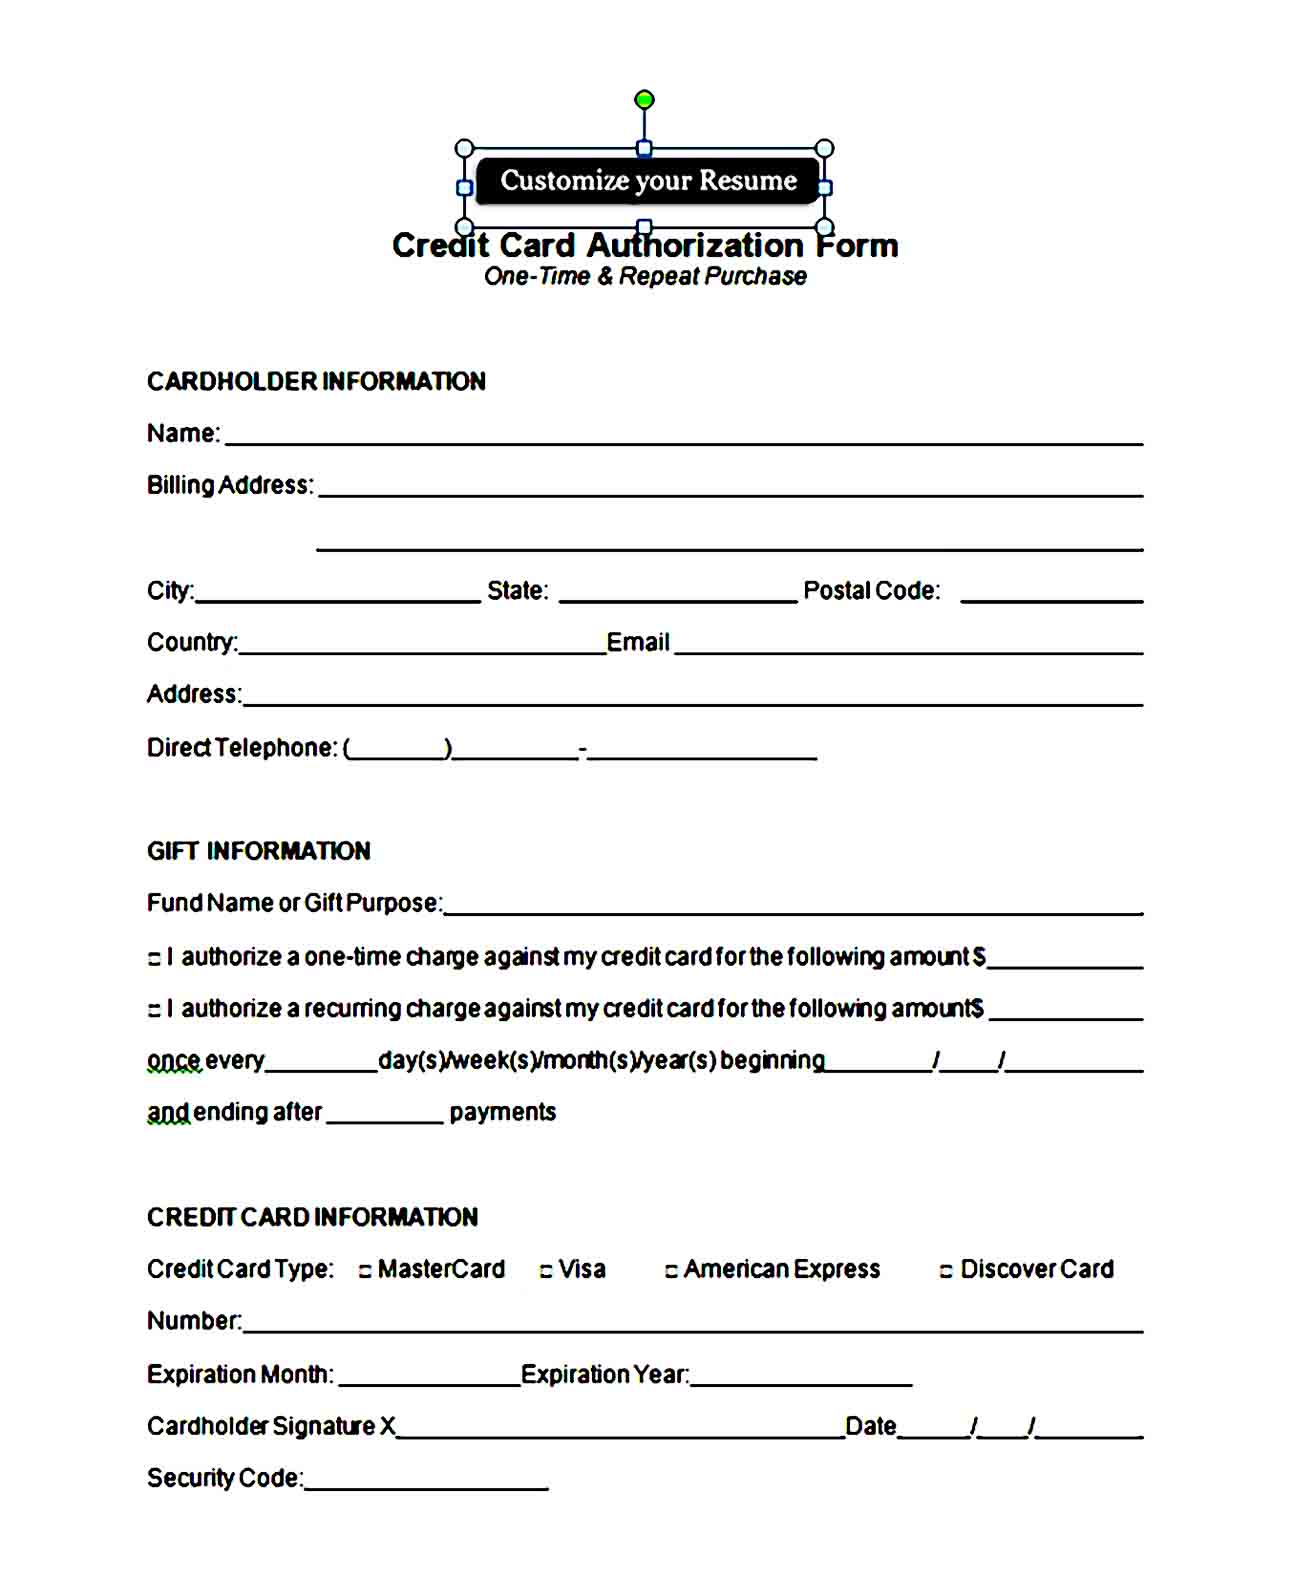 credit card authorization form template 16